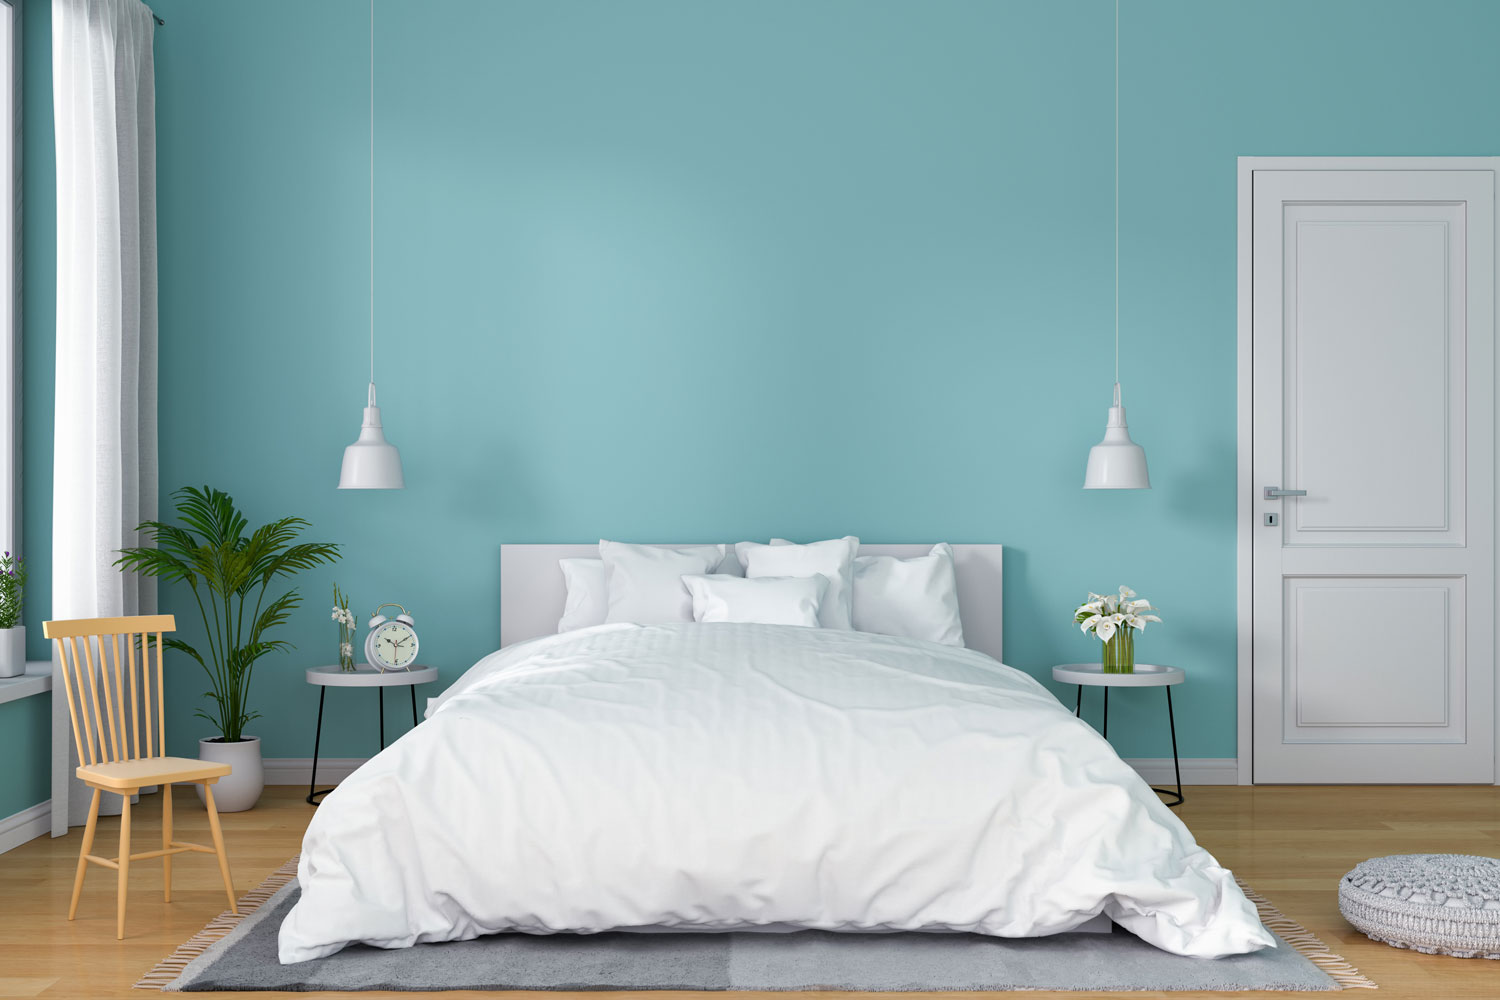 A light blue painted bedroom with white beddings matched with wooden flooring